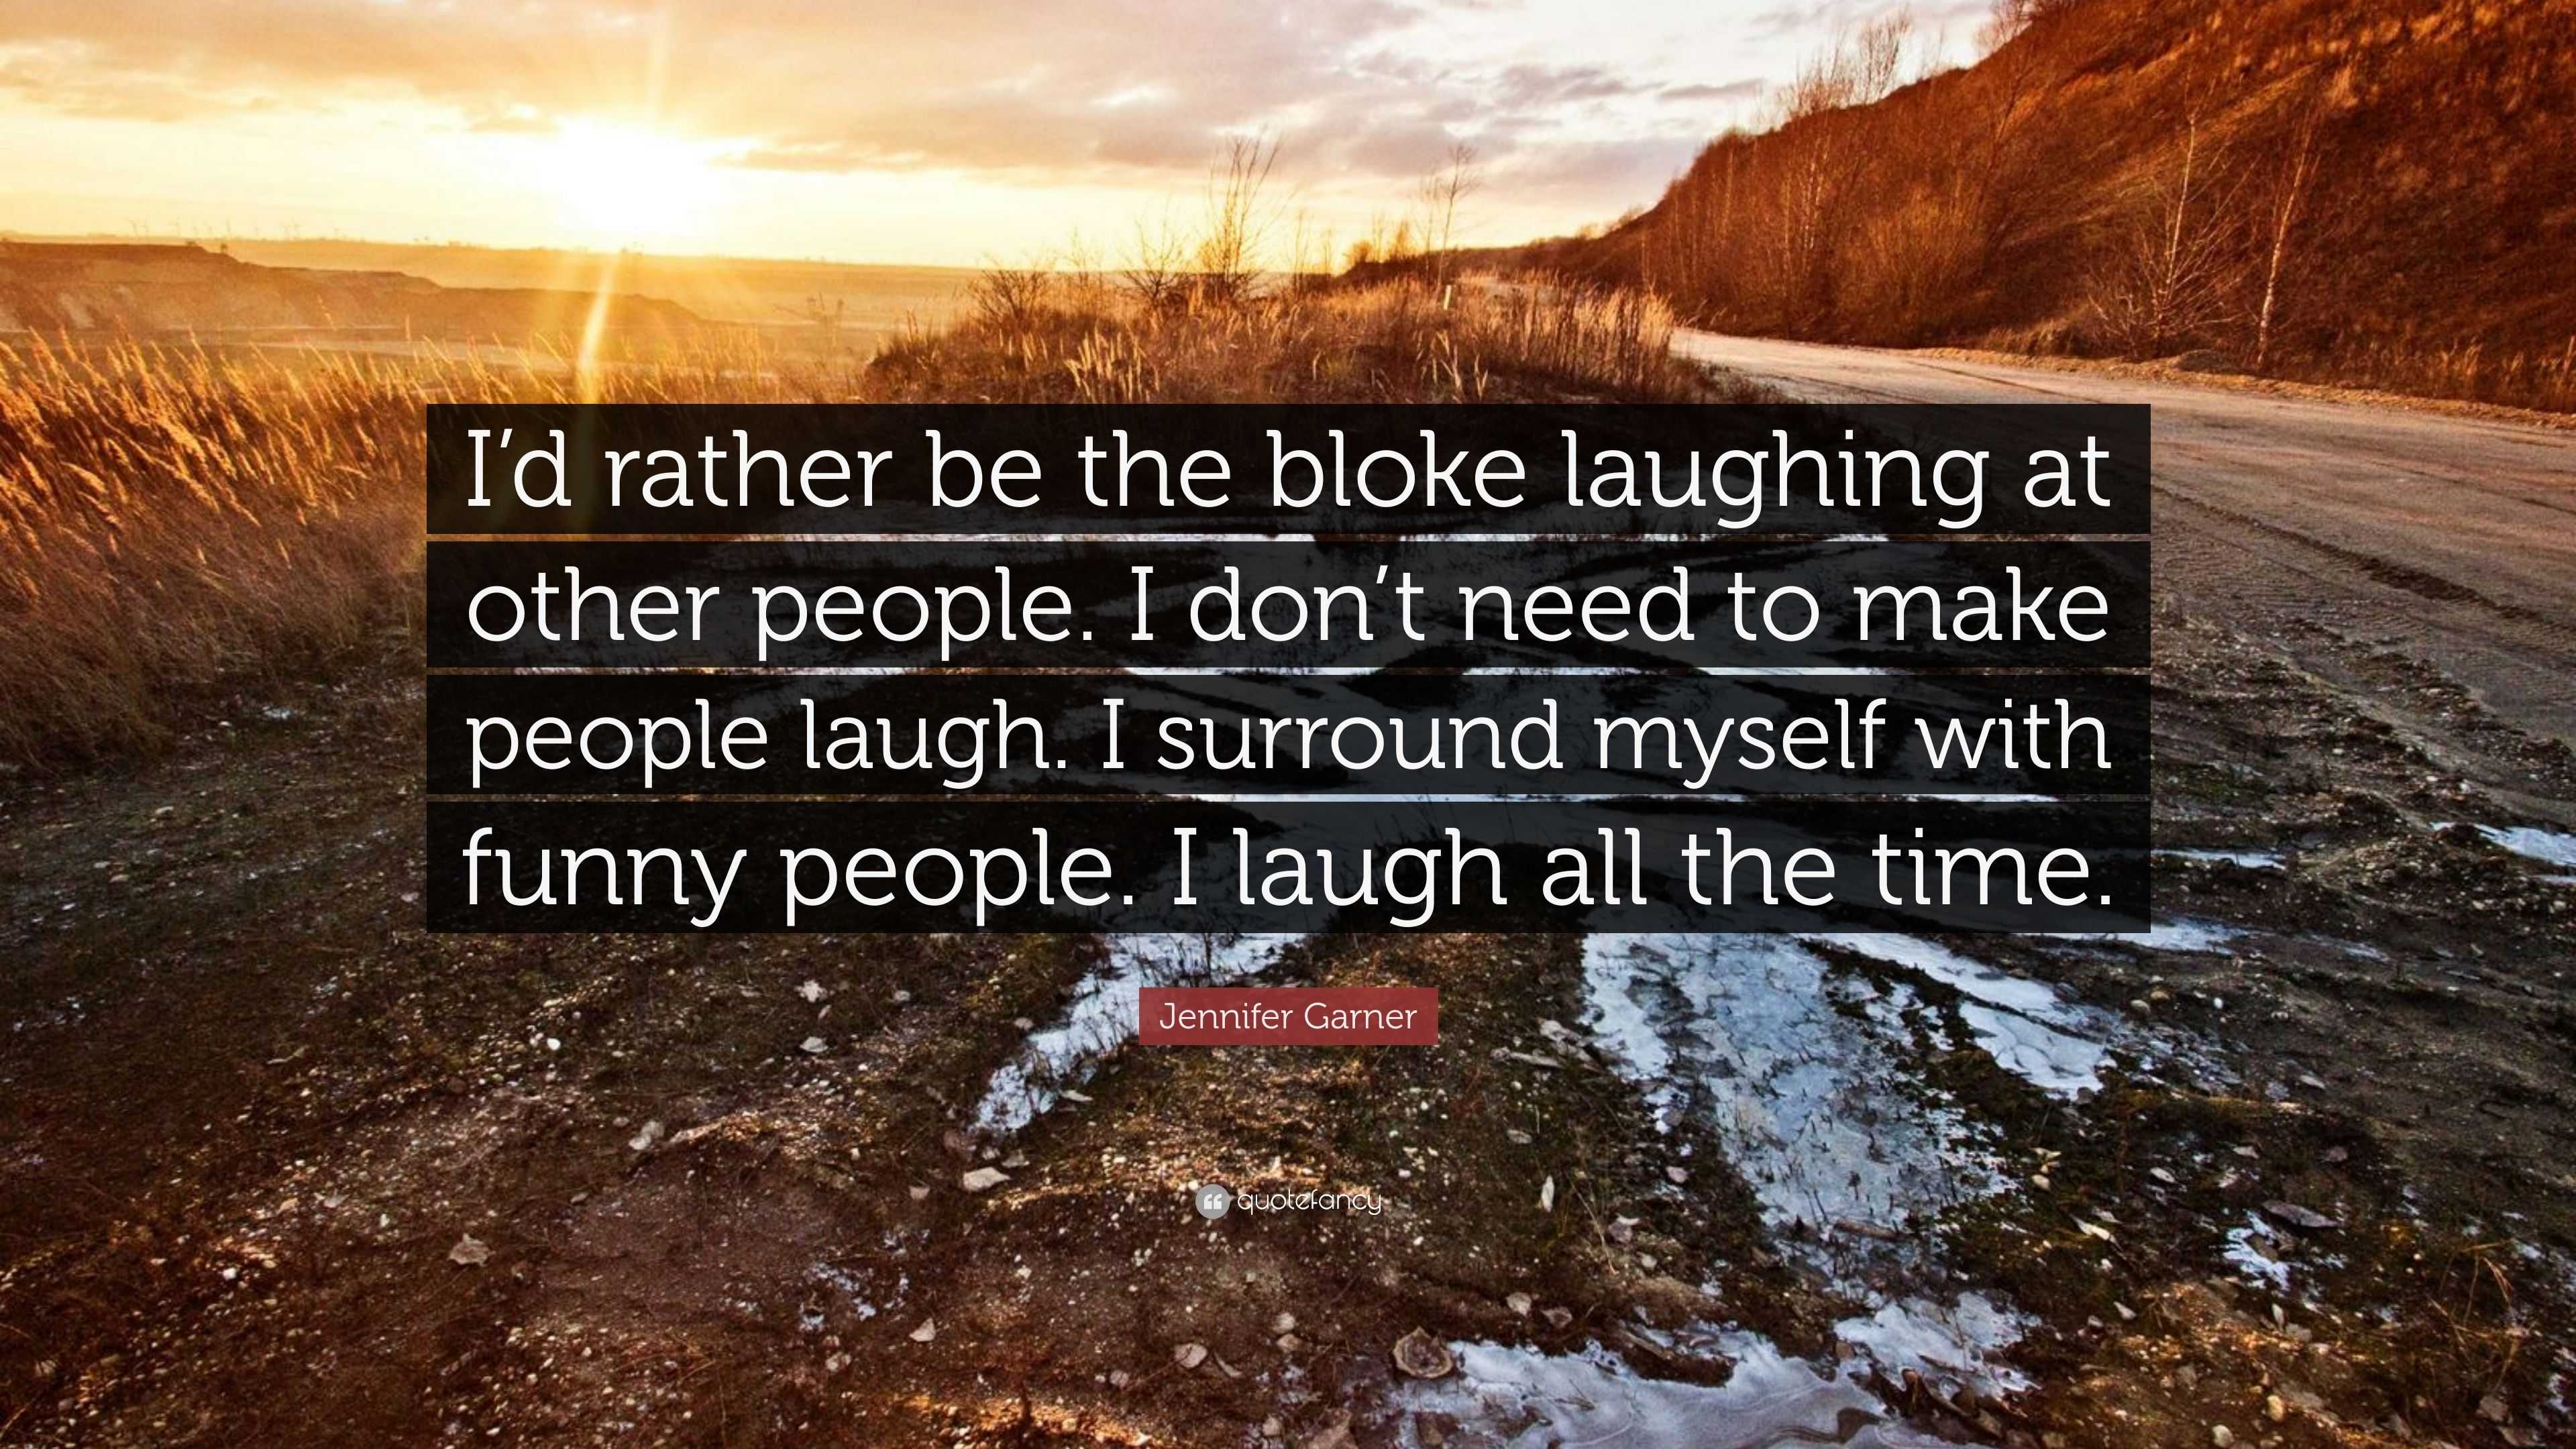 Jennifer Garner Quote: “I'd rather be the bloke laughing at other people. I  don't need to make people laugh. I surround myself with funny people...”